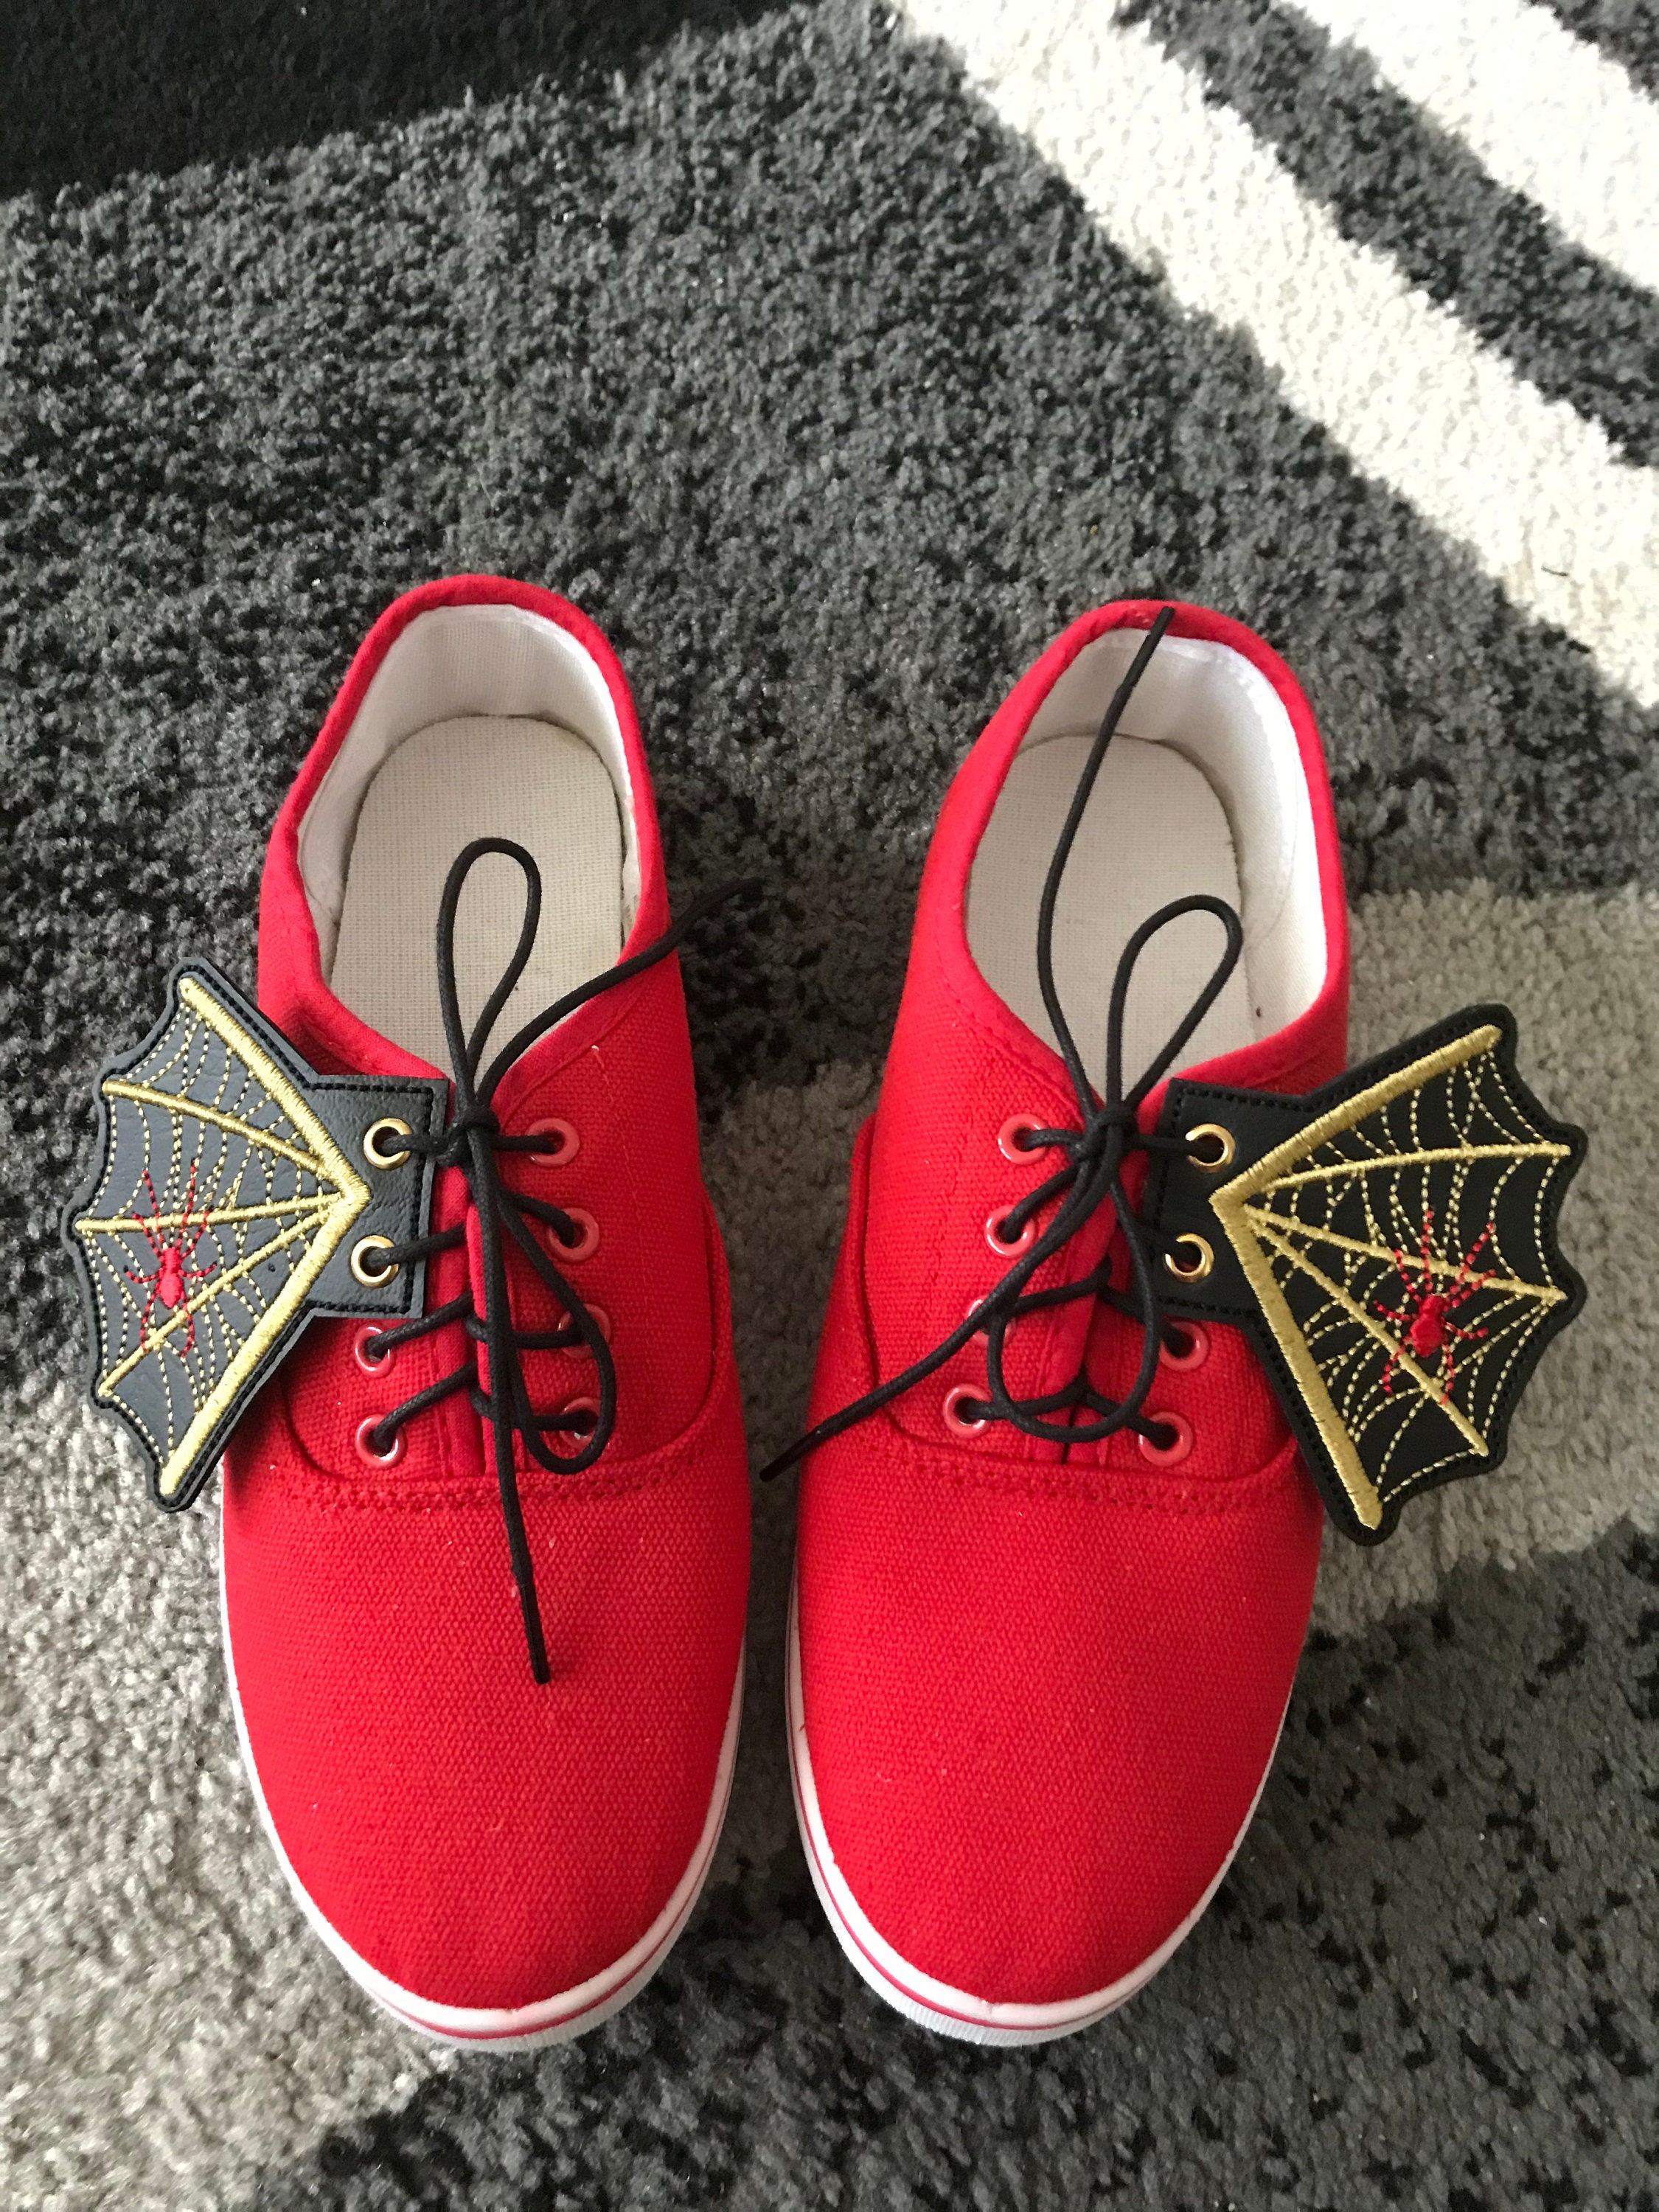 Spider Shoe Clip Black Spider Shoe Charm Halloween Shoe Clips Spider Shoe Clips Shoe Clips Shoe Accessories for Woman Gifts for Her